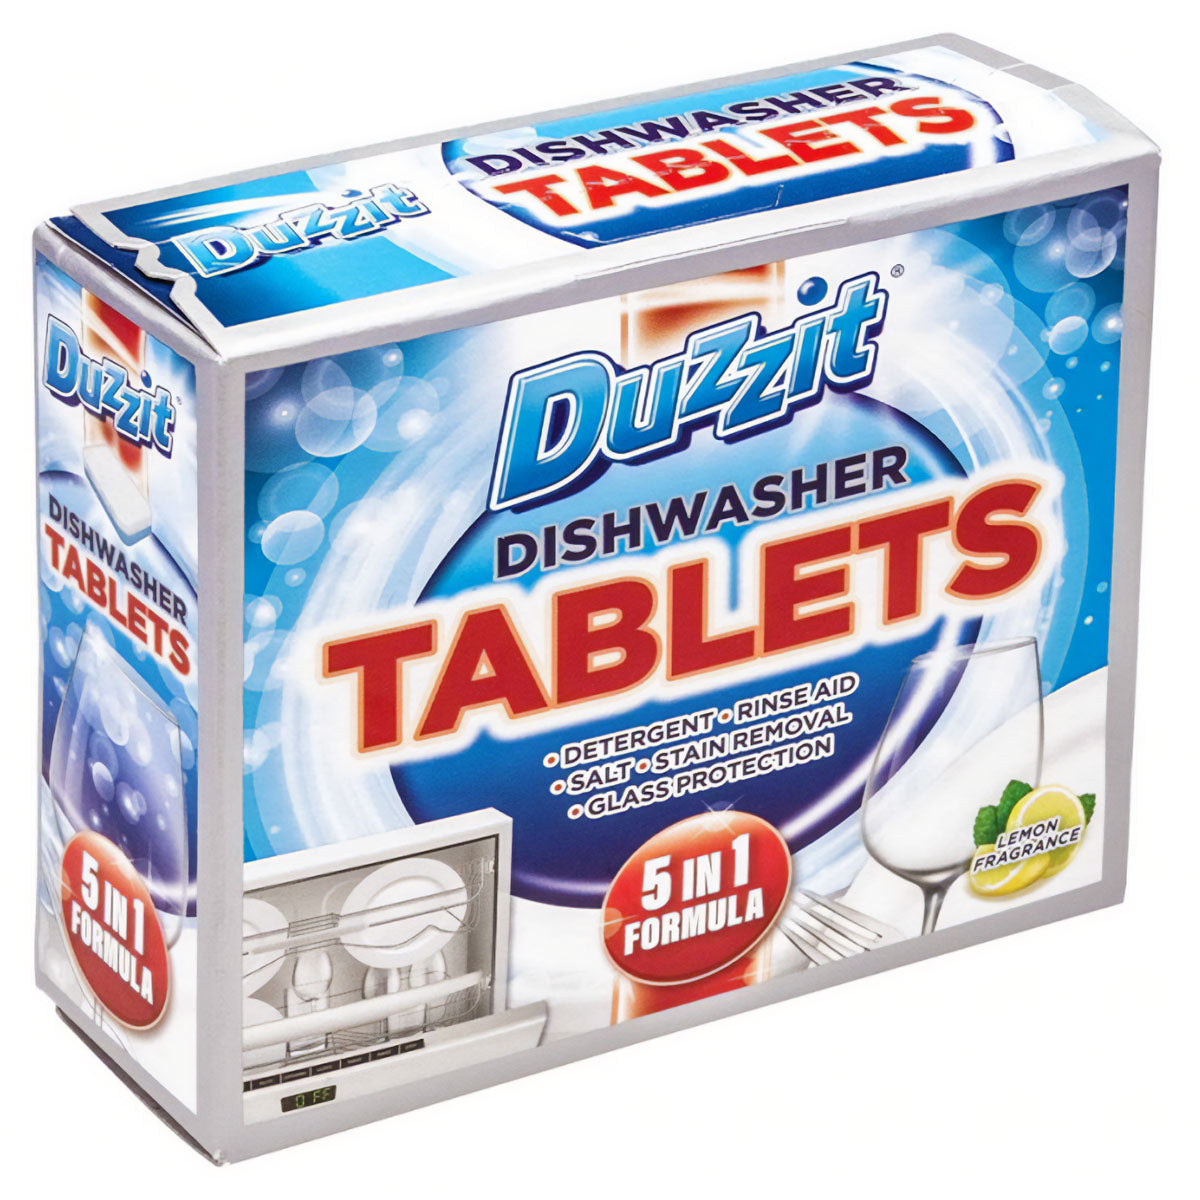 Duzzit - Dishwasher Tablets 5in1 Lemon Fragrance - 12 Tablets by Duzzit in a box.